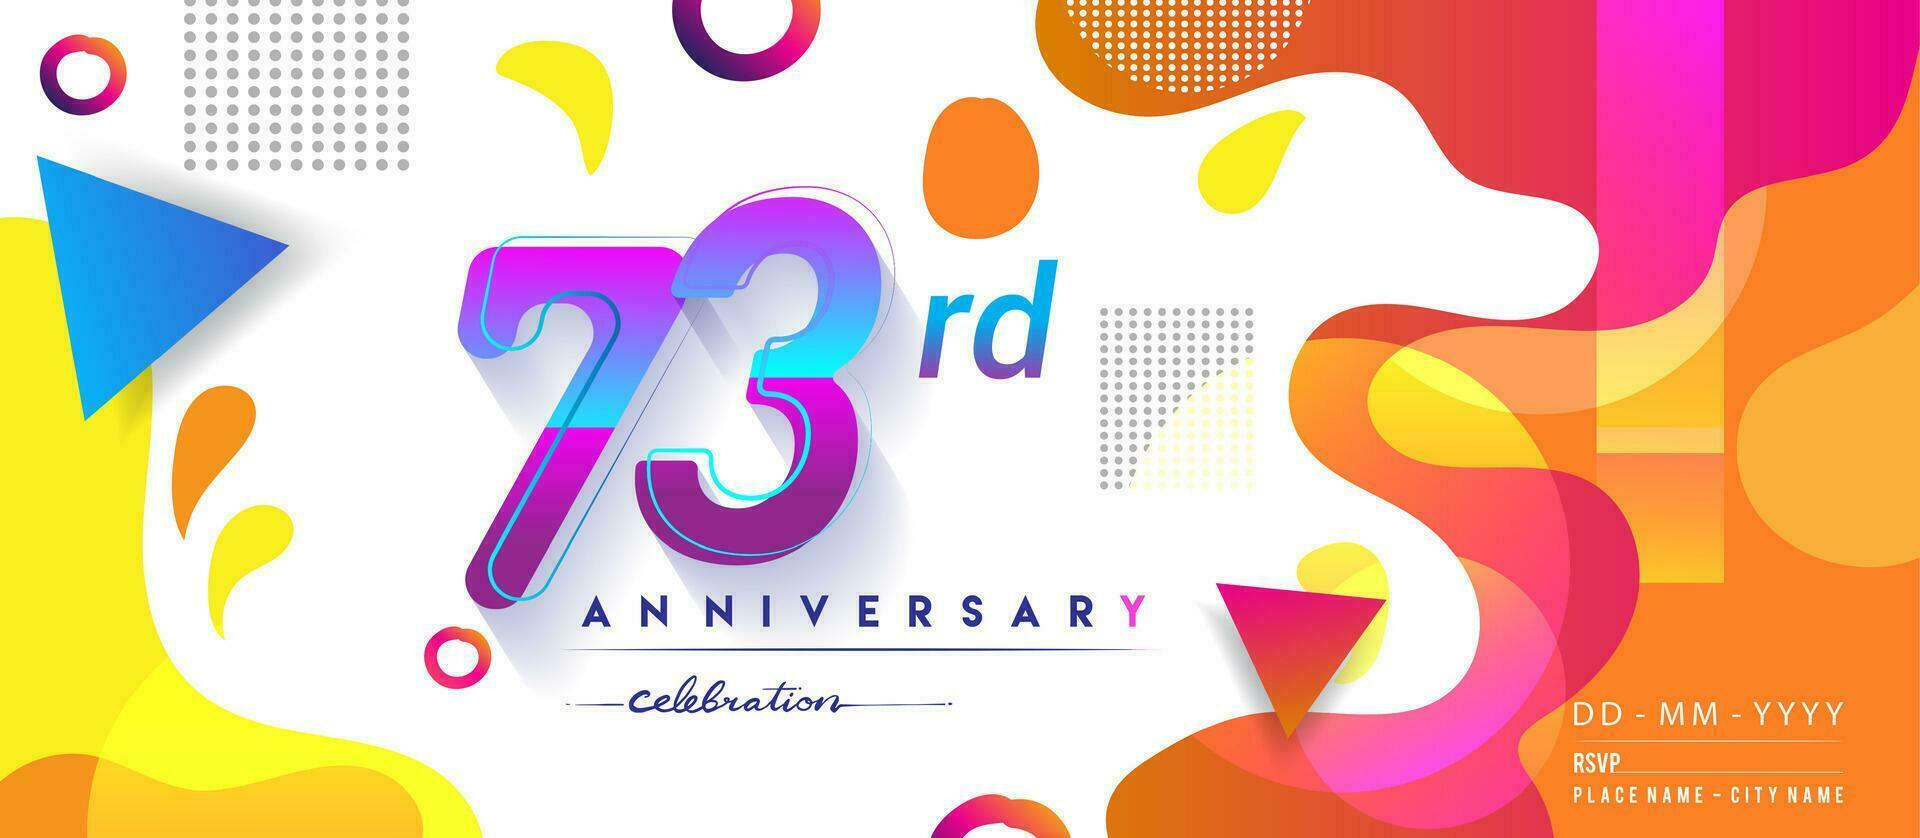 73rd years anniversary logo, vector design birthday celebration with colorful geometric background and circles shape.